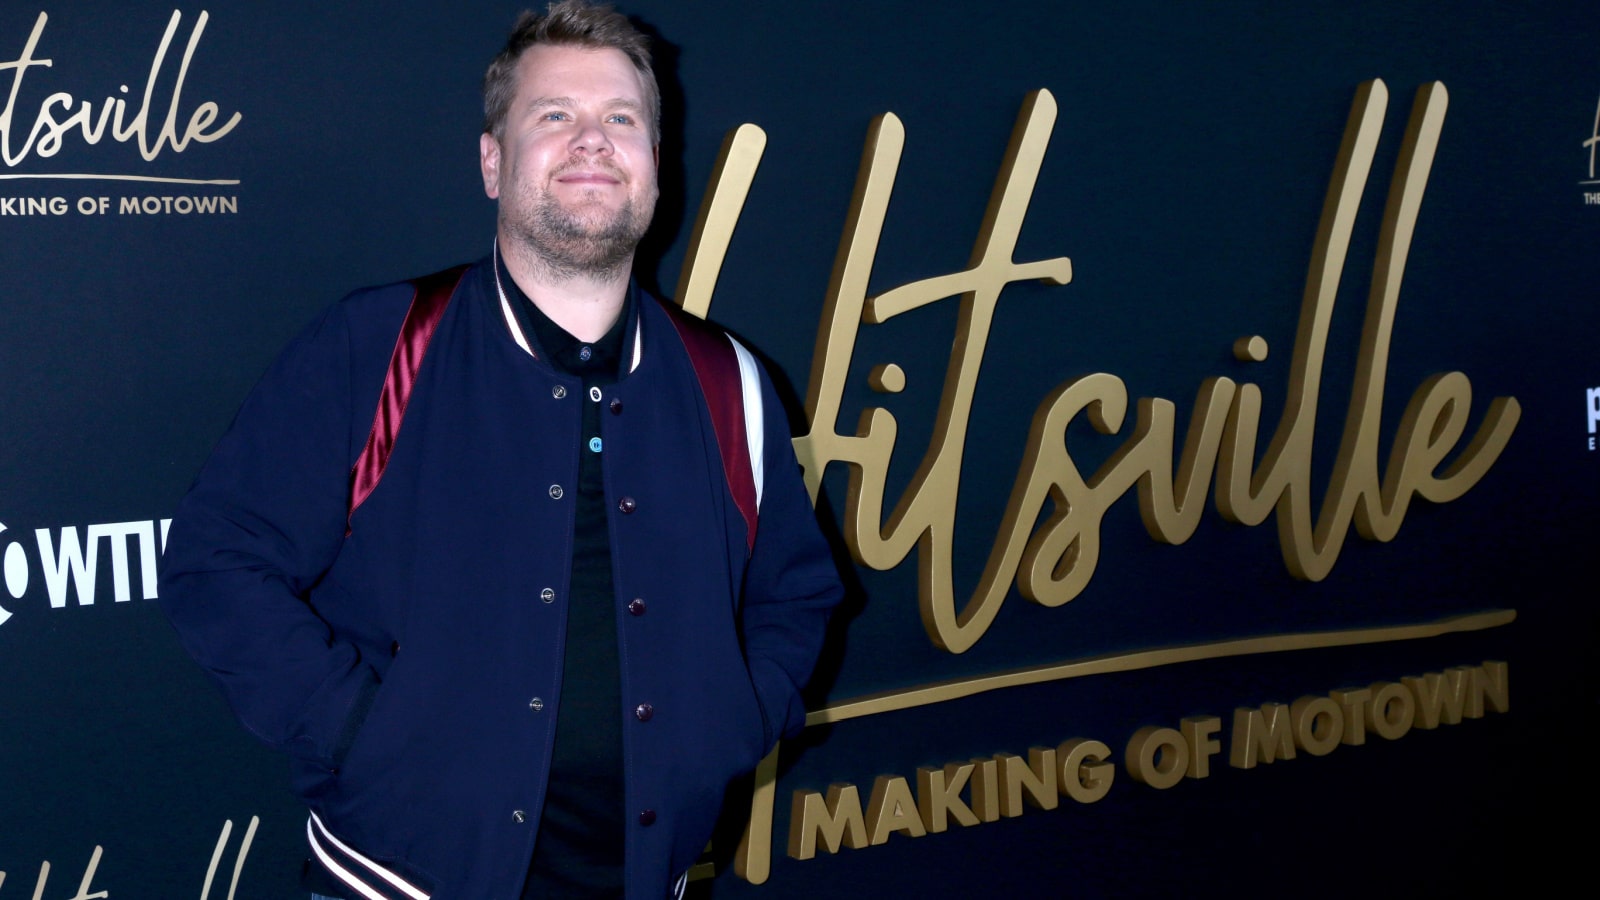 LOS ANGELES - AUG 8: James Corden at the "Hitsville: The Making Of Motown" Premiere at the Harmony Gold Theater on August 8, 2019 in Los Angeles, CA